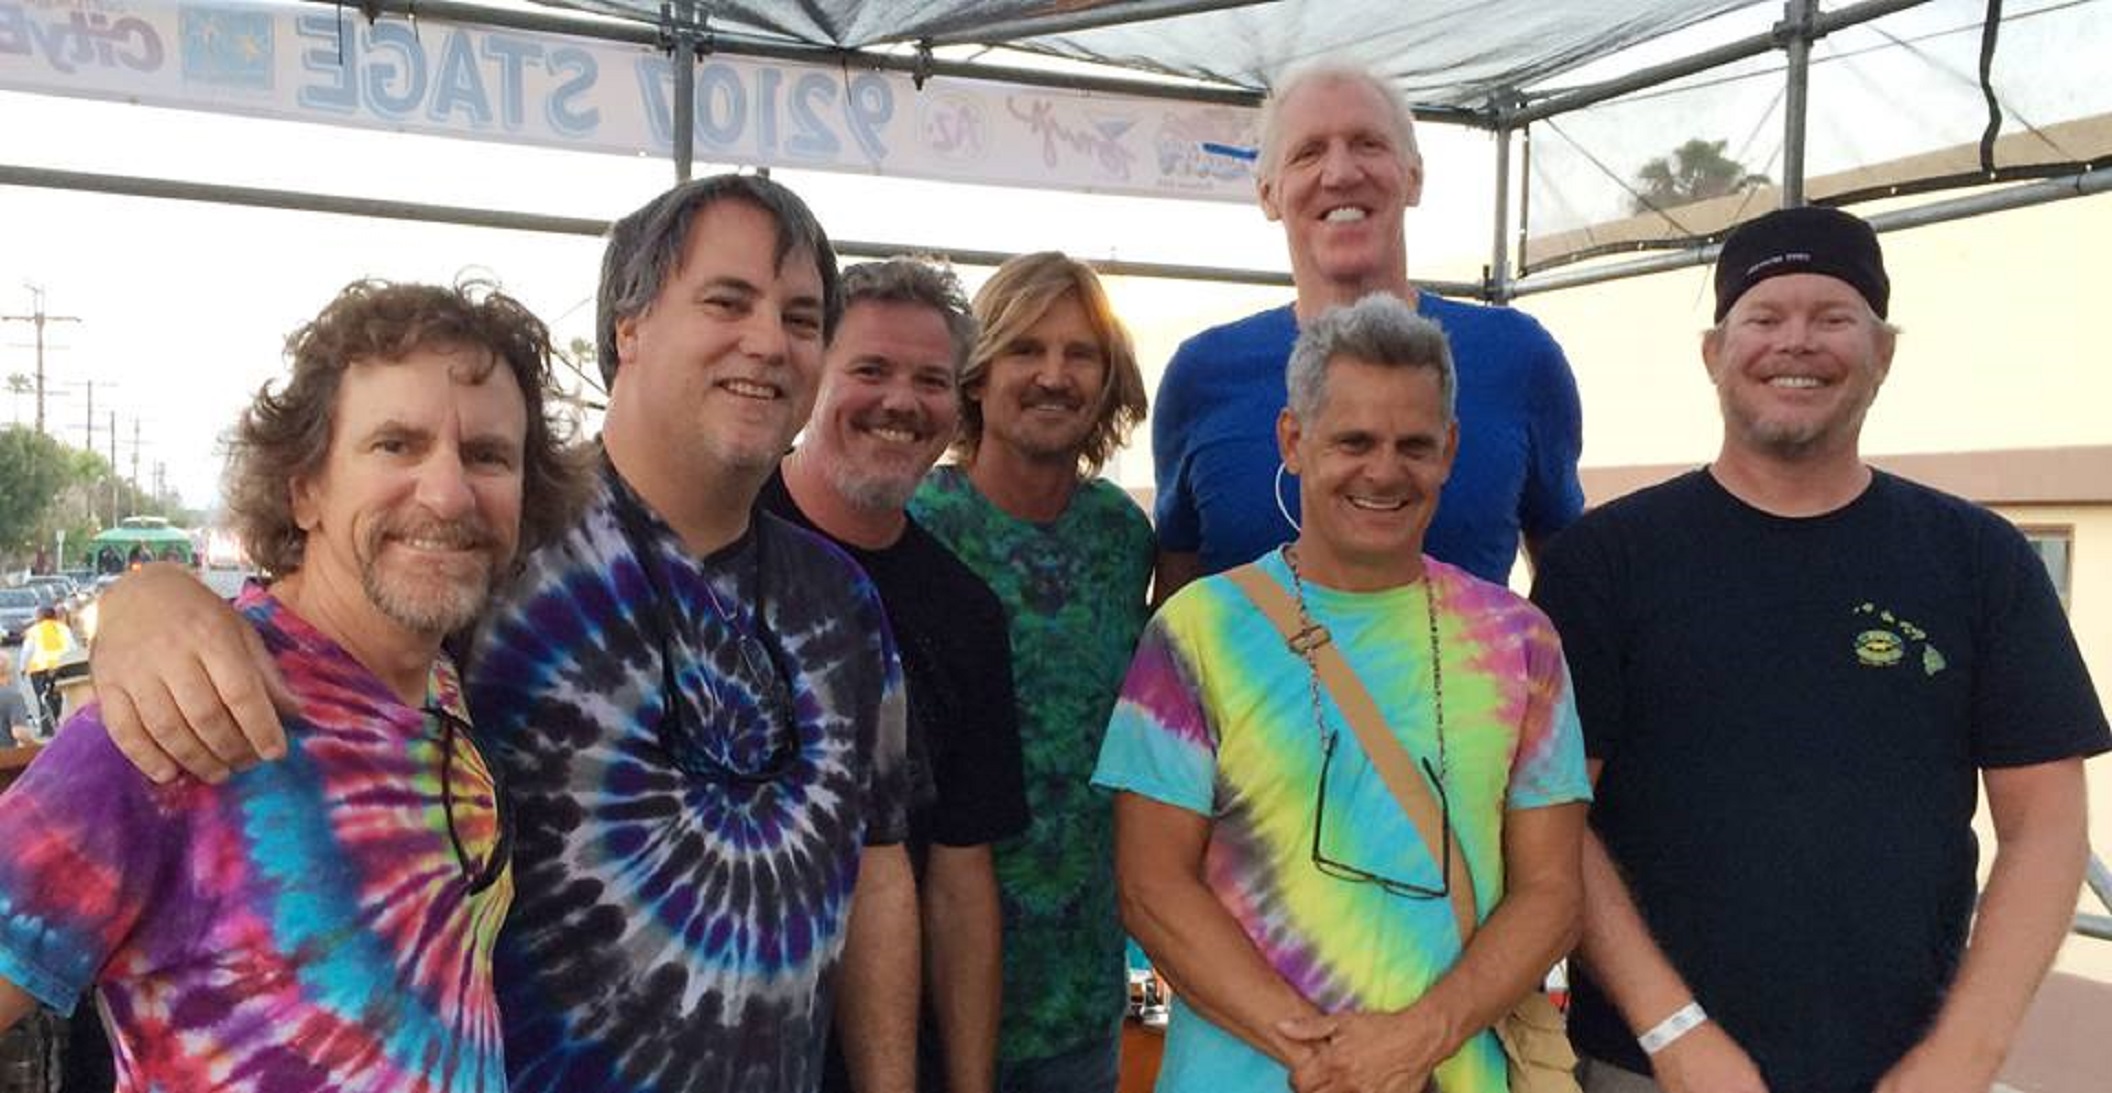 Bill Walton's Upcoming Gig At Sweetwater With Jeff Chimenti and Special Guests